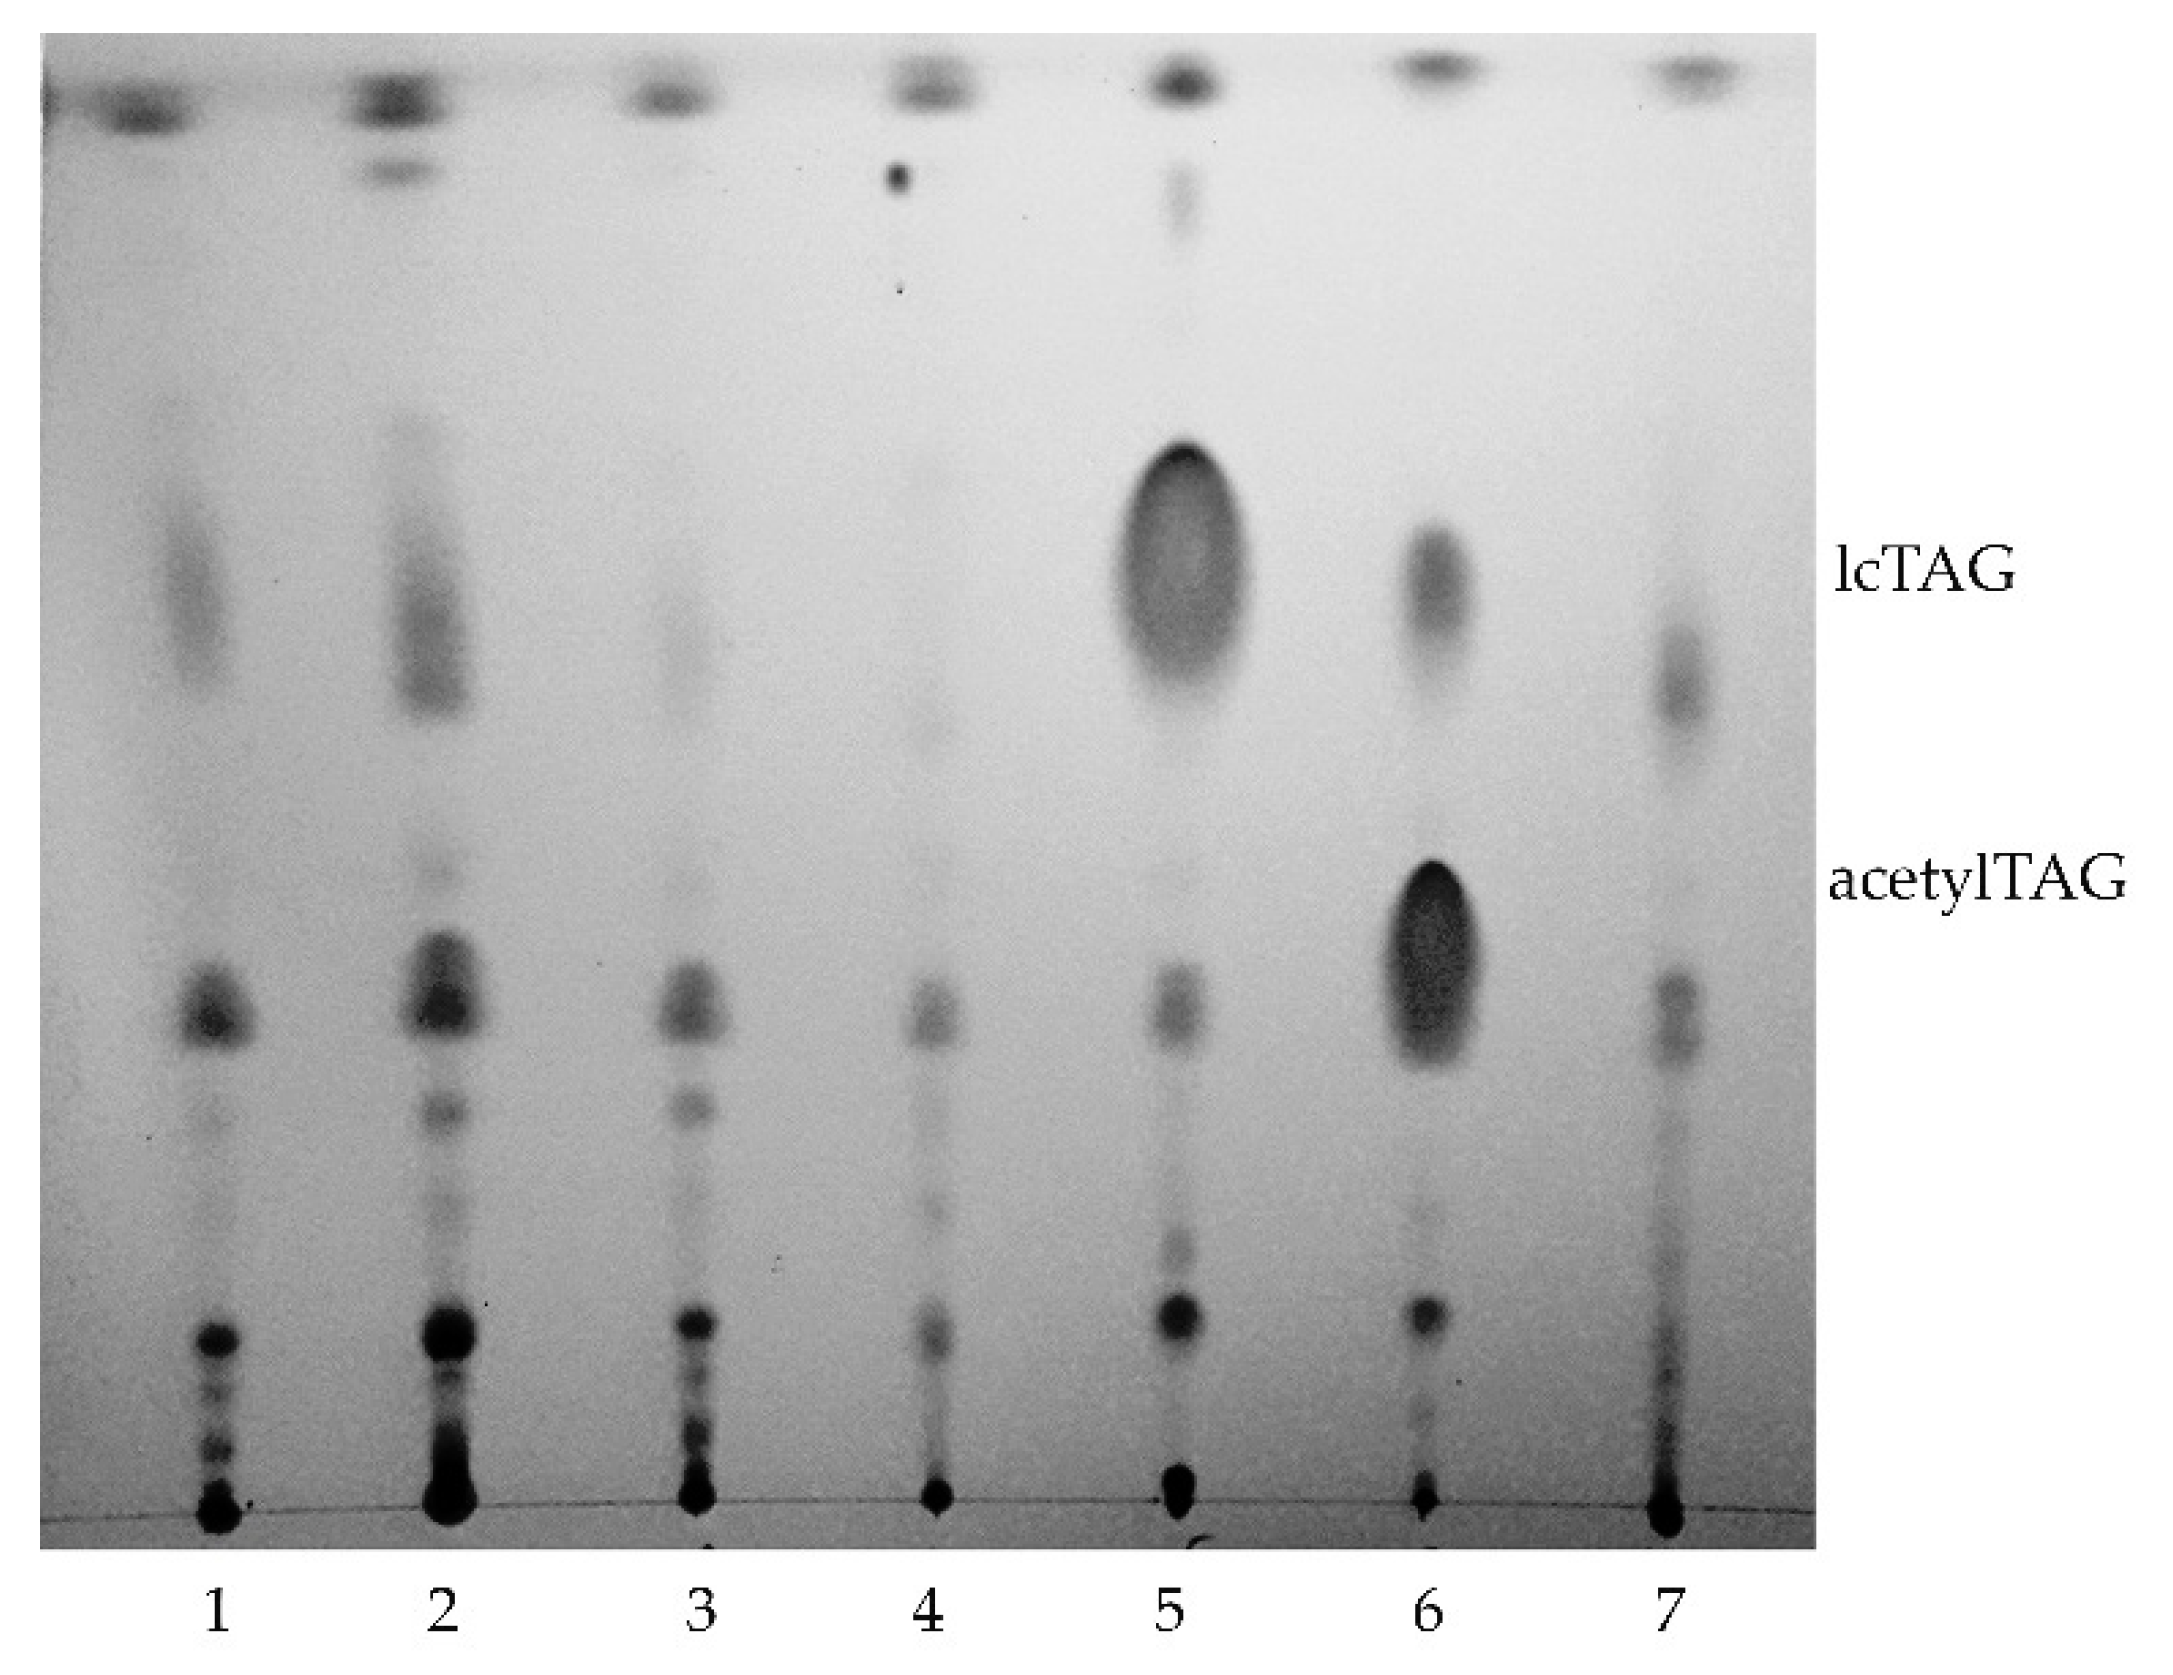 Life | Free Full-Text | Diacylglycerol Acetyltransferase Gene Isolated from  Euonymus europaeus L. Altered Lipid Metabolism in Transgenic Plant towards  the Production of Acetylated Triacylglycerols | HTML